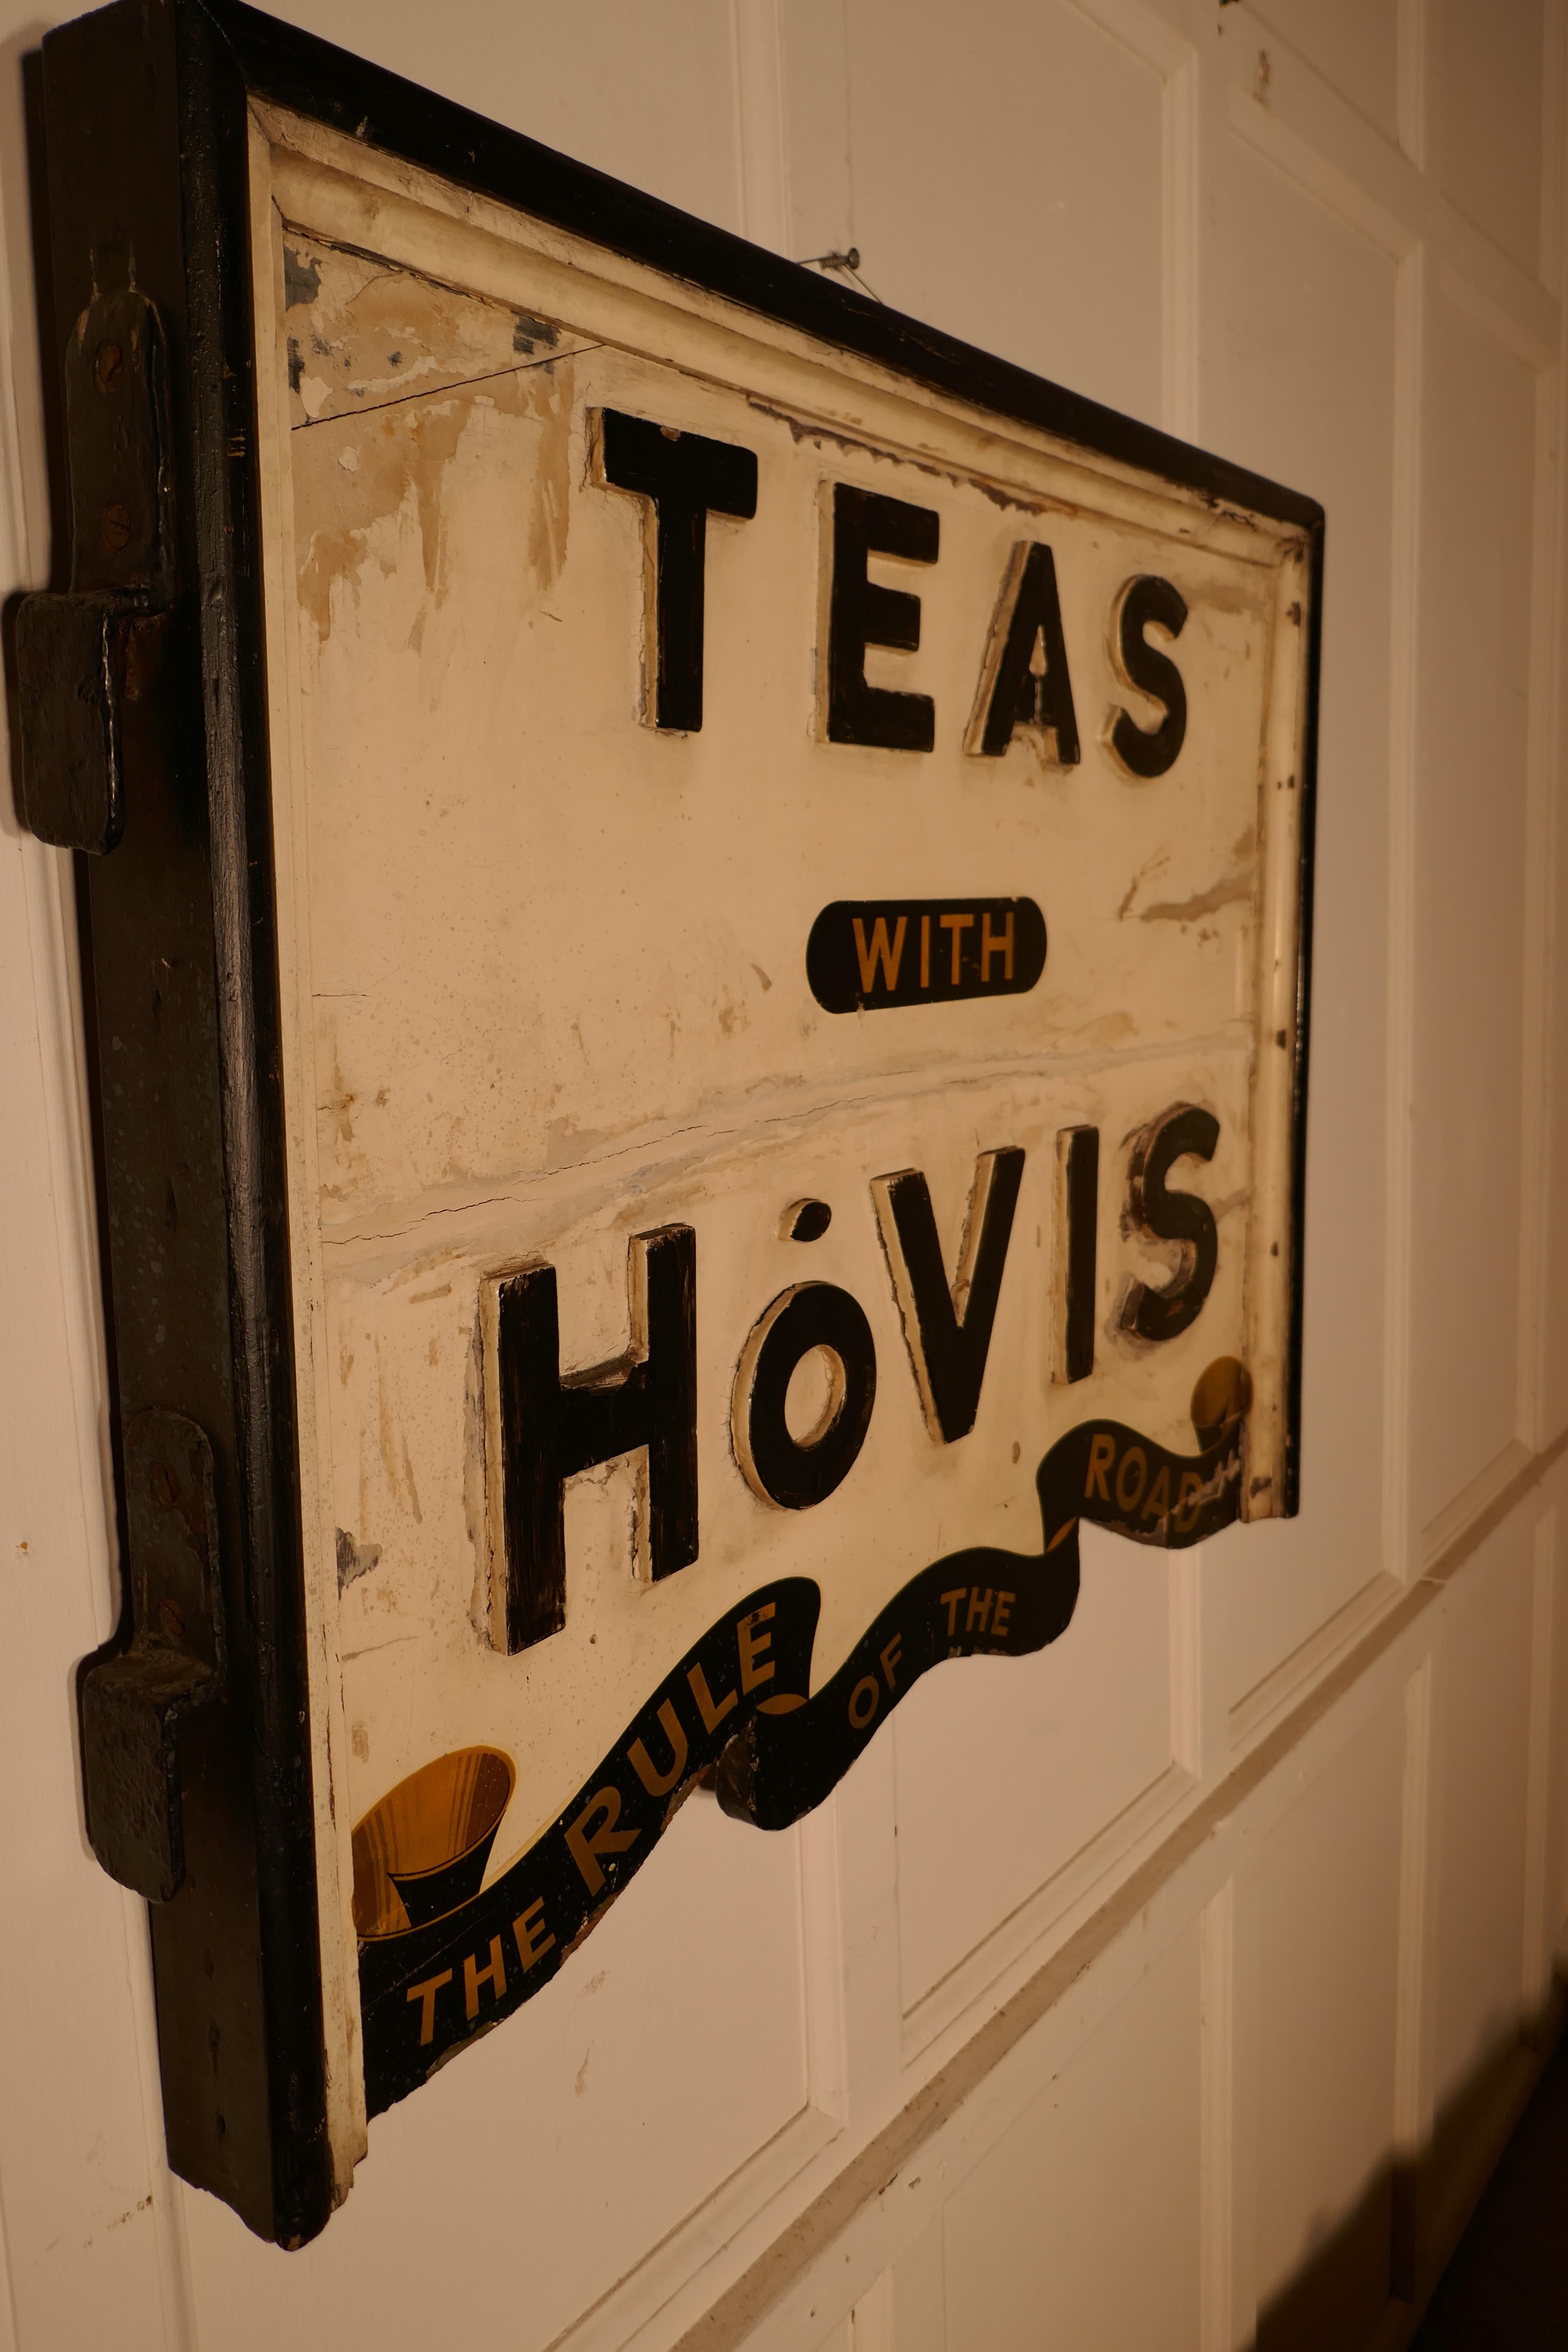 Three dimensional double-sided wooden hovis tea shop sign 

A great piece of social history, this sign is in wood it has been made with applied large letters, sadly here is a few bits missing but they could be restored if wished
The double-sided